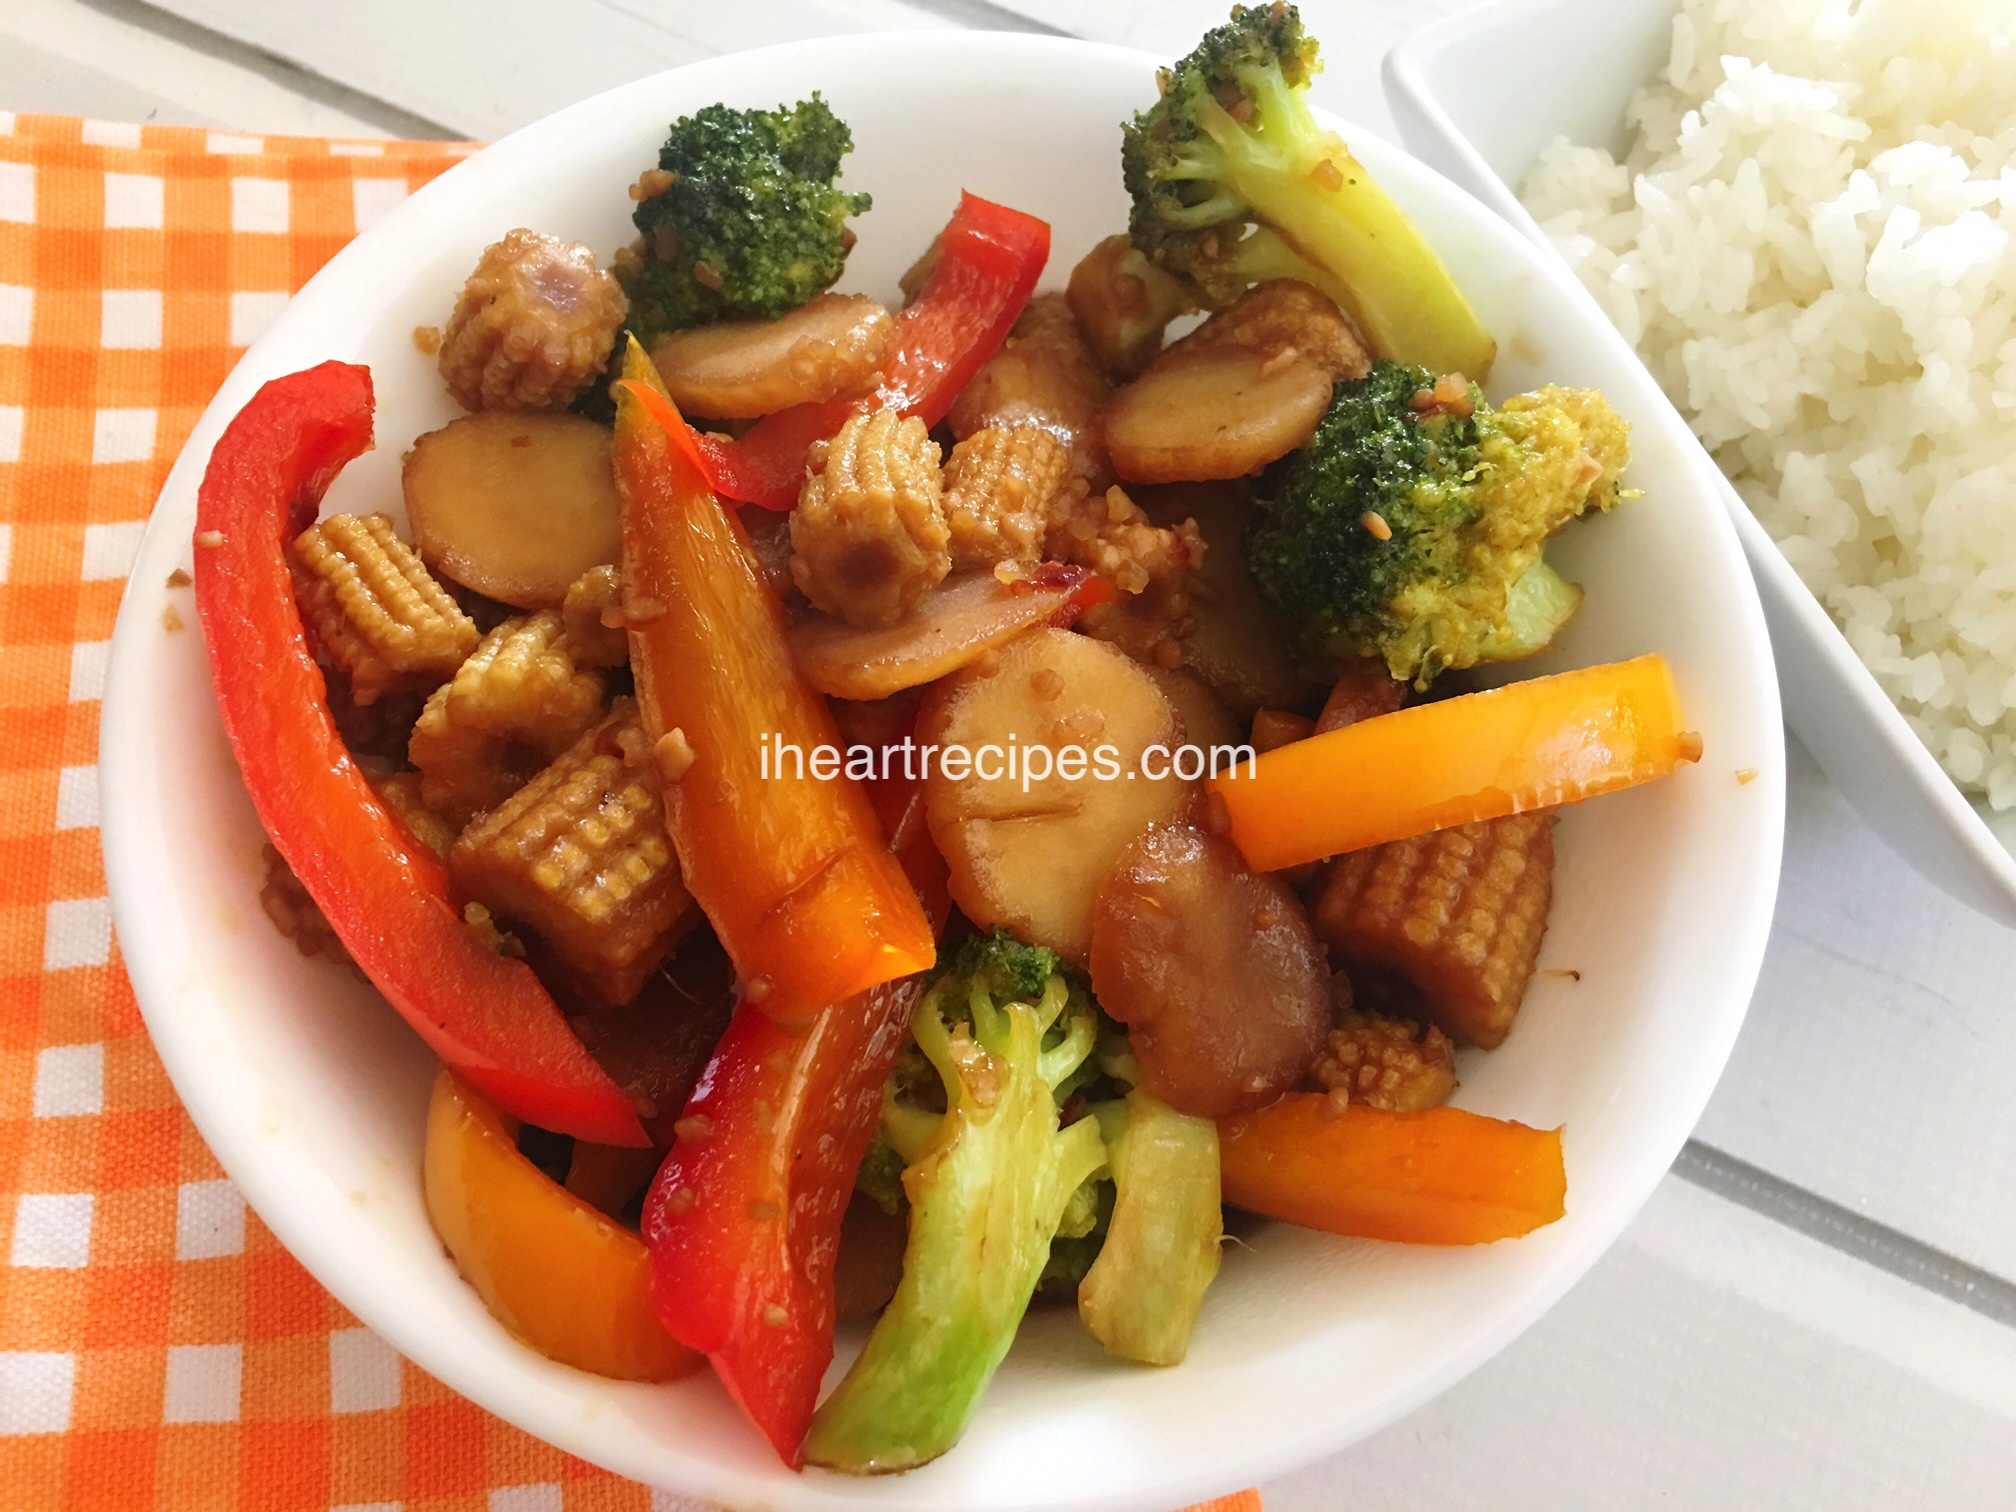 A small bowl of stir fry vegetables -- peppers, baby corns, broccoli, and water chestnuts, cooked in a savory sauce and served with rice.